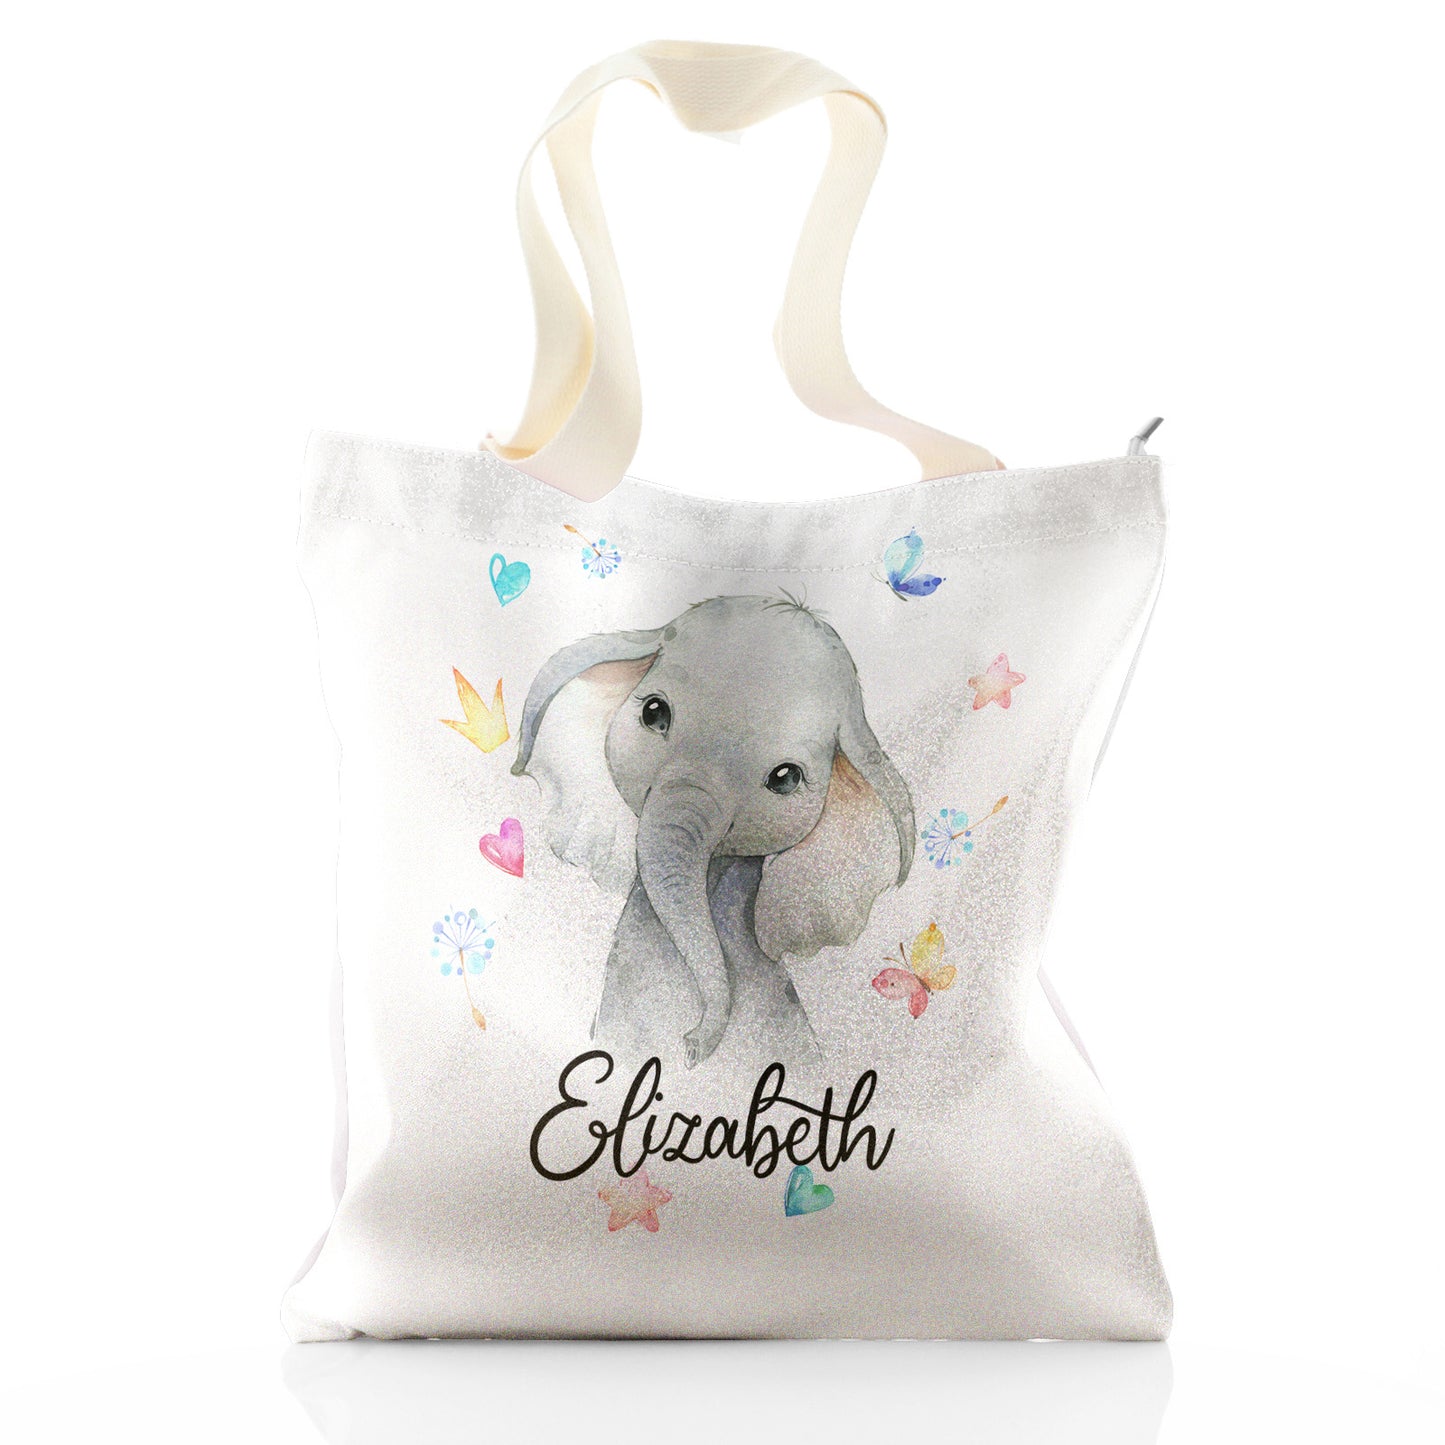 Personalised Glitter Tote Bag with Grey Elephant with Hearts Stars Crowns Butterfly and Cute Text